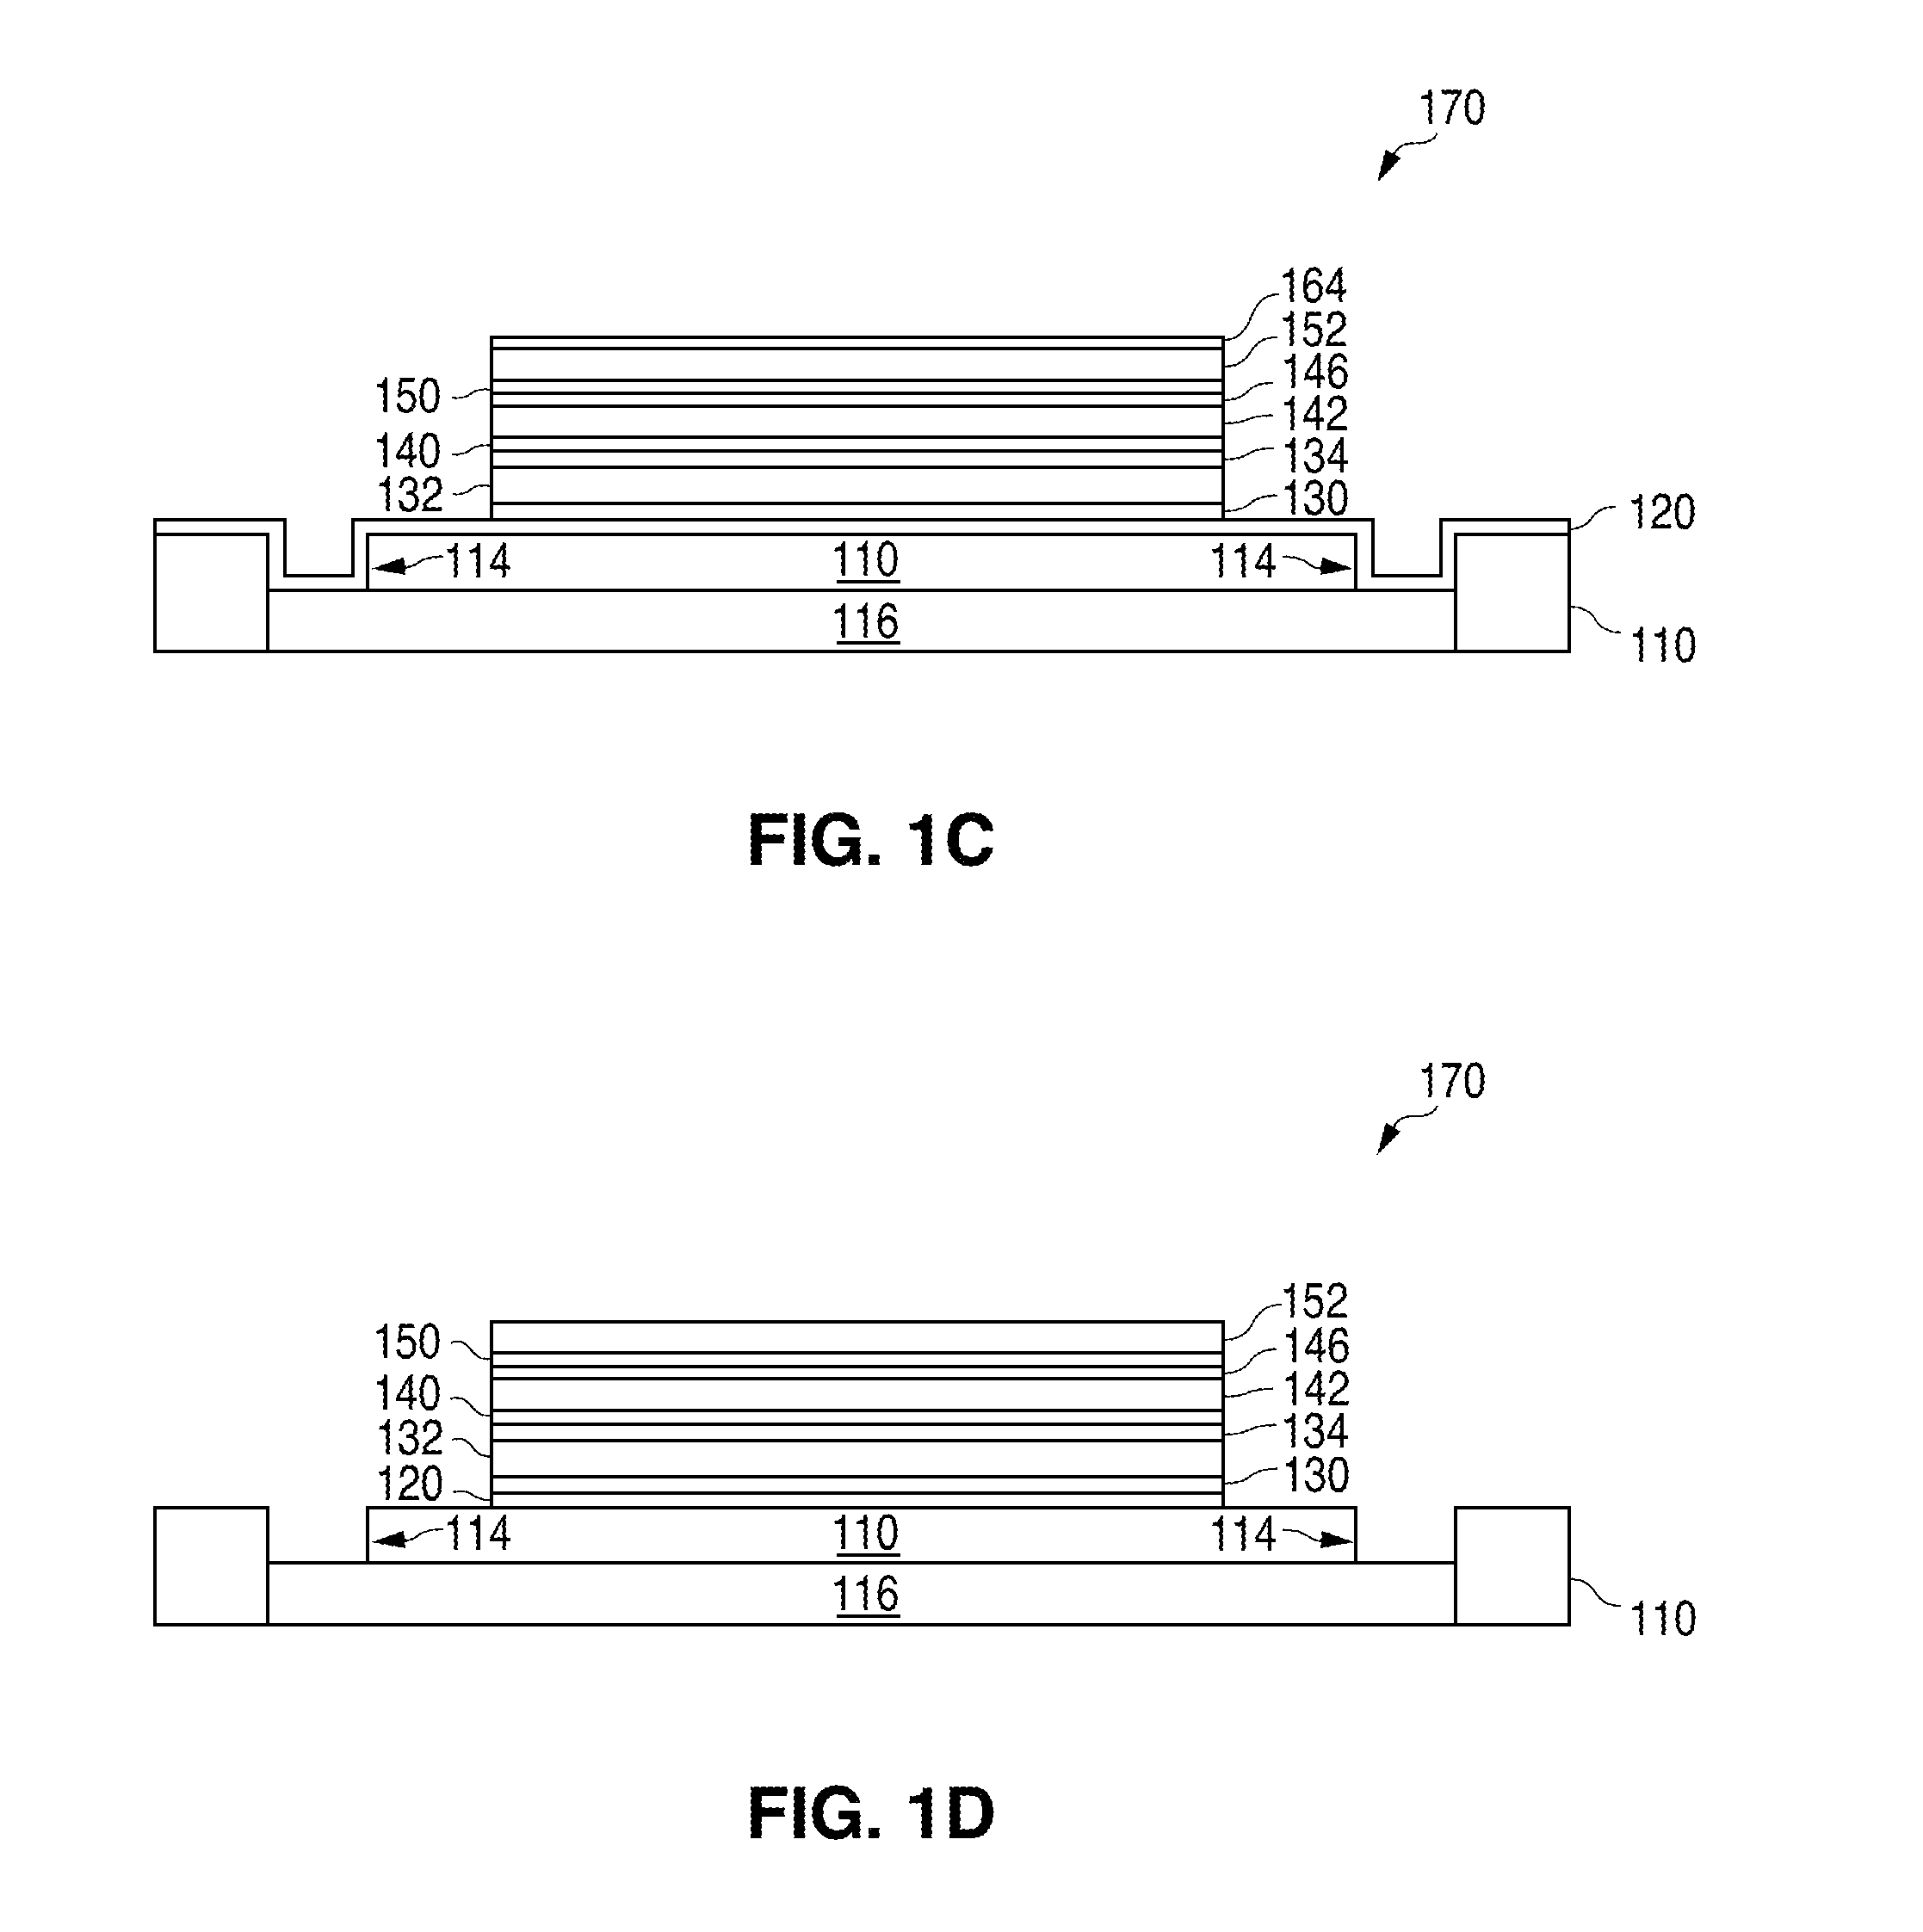 Method of Forming a Laminated Magnetic Core with Sputter Deposited and Electroplated Layers